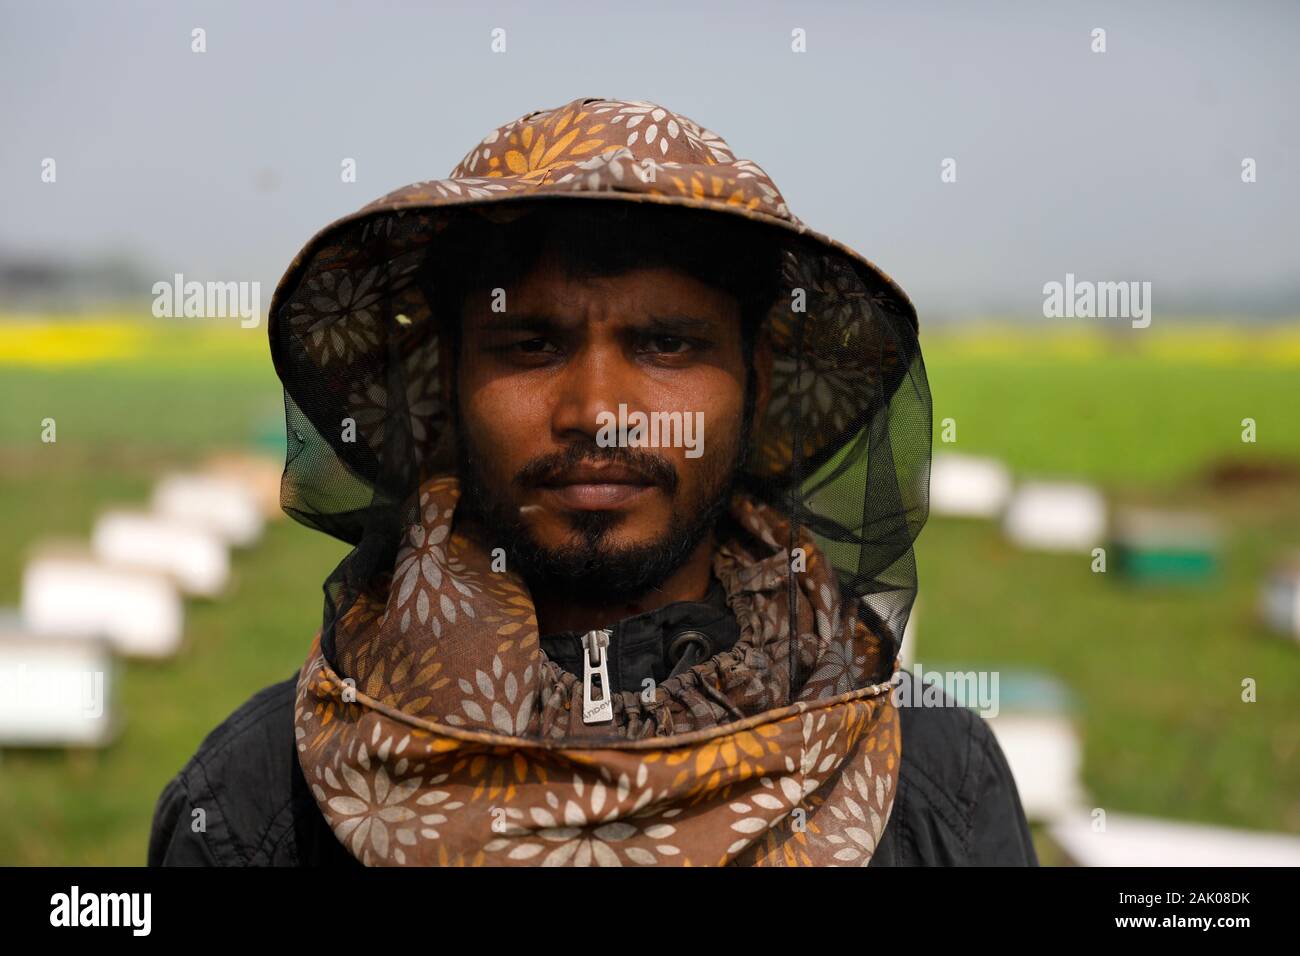 A Bangladeshi farmer Shahidul poses for a photo at a mustard field in Munshiganj, Dhaka.According to the Bangladesh Institute of Apiculture (BIA), around 25 thousand cultivators including 1,000 commercial agriculturists produce at least 1500 tons of good quality honey a year across the country. Stock Photo